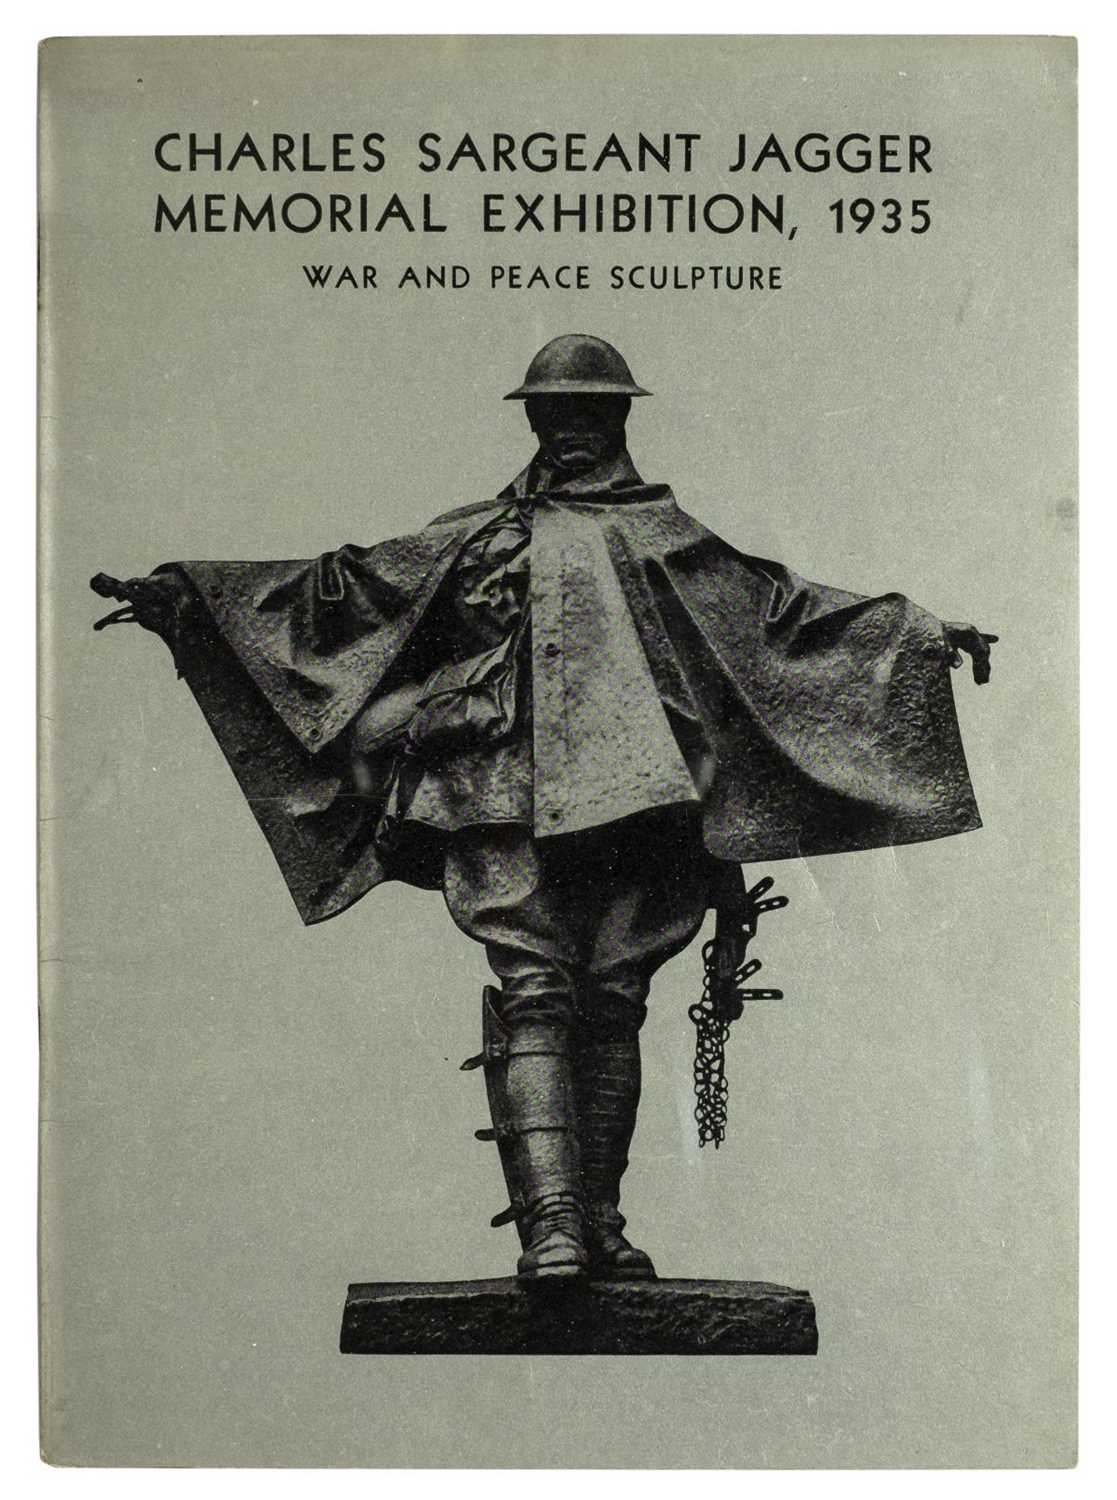 Lot 361 - Jagger (Charles Sargeant). Charles Sargeant Jagger Memorial Exhibition, 1935